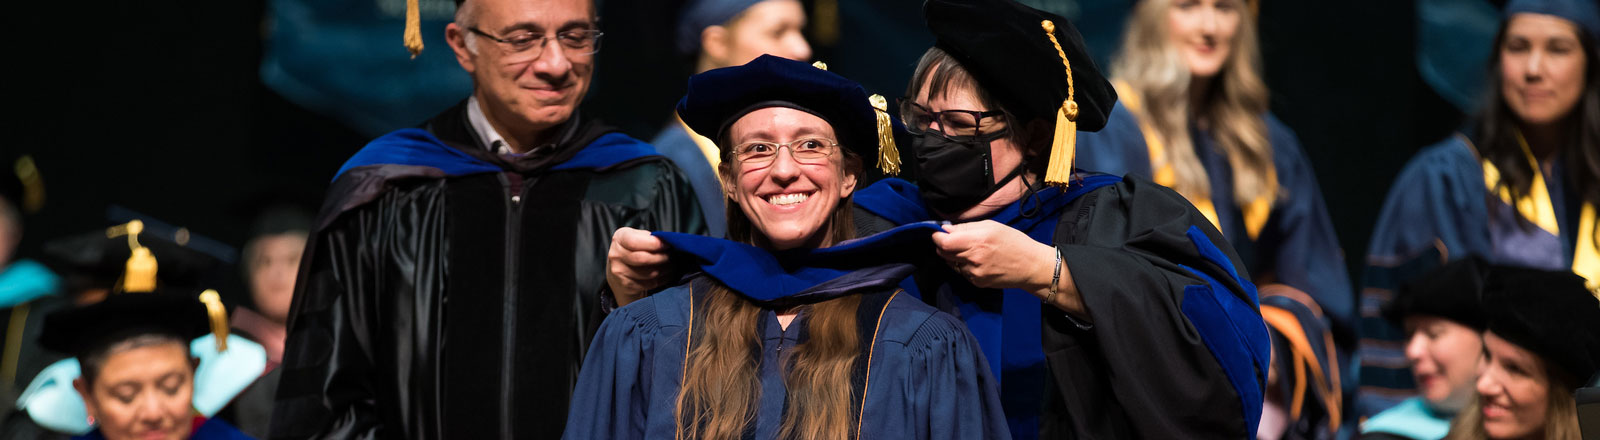 Student being hooded at doctoral commencement ceremony 